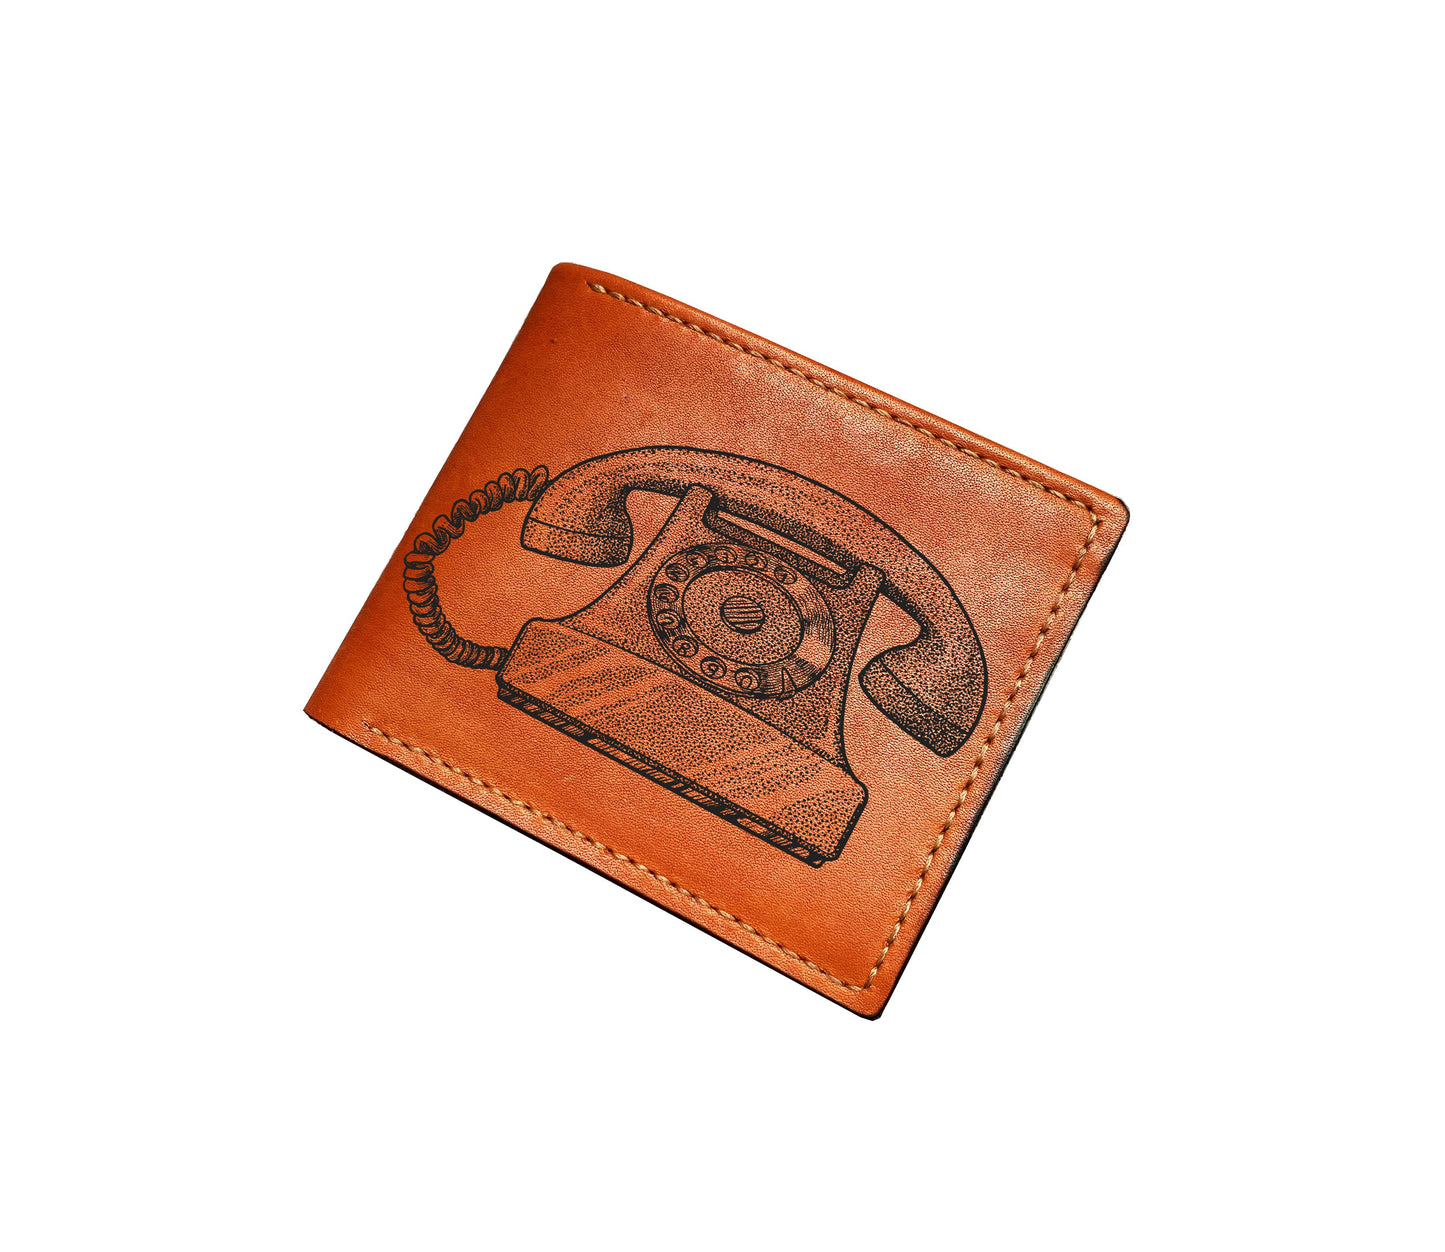 Mayan Corner - Vintage object retro style wallet, old telephone drawing pattern, custom leather wallet, leather gift ideas for him in birthday, valentine